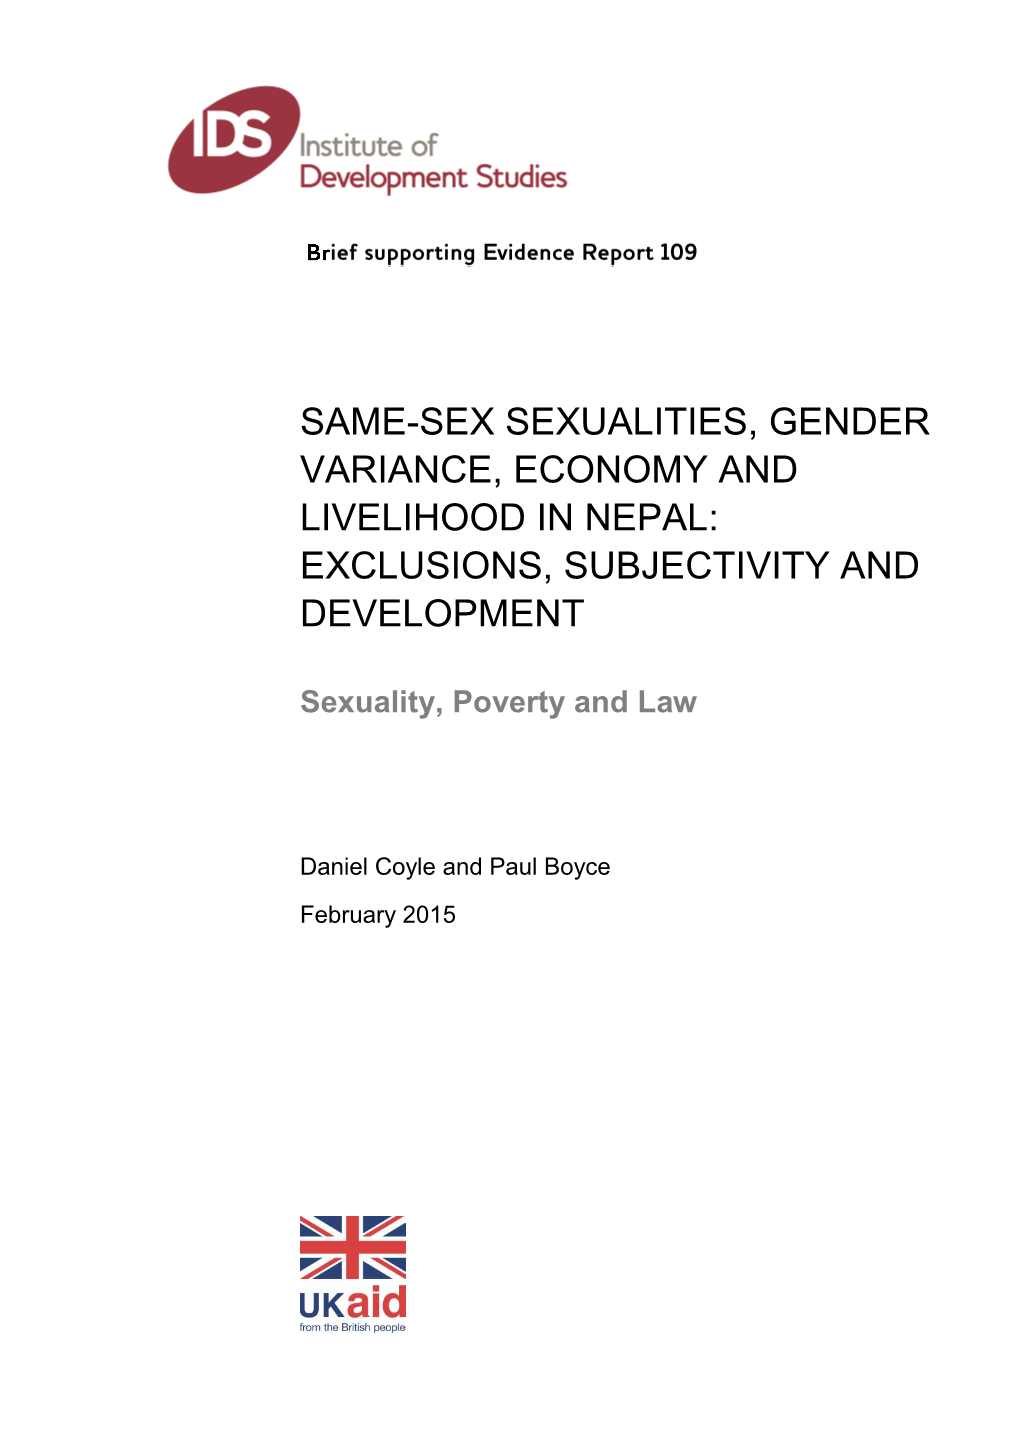 Same-Sex Sexualities, Gender Variance, Economy and Livelihood in Nepal: Exclusions, Subjectivity and Development